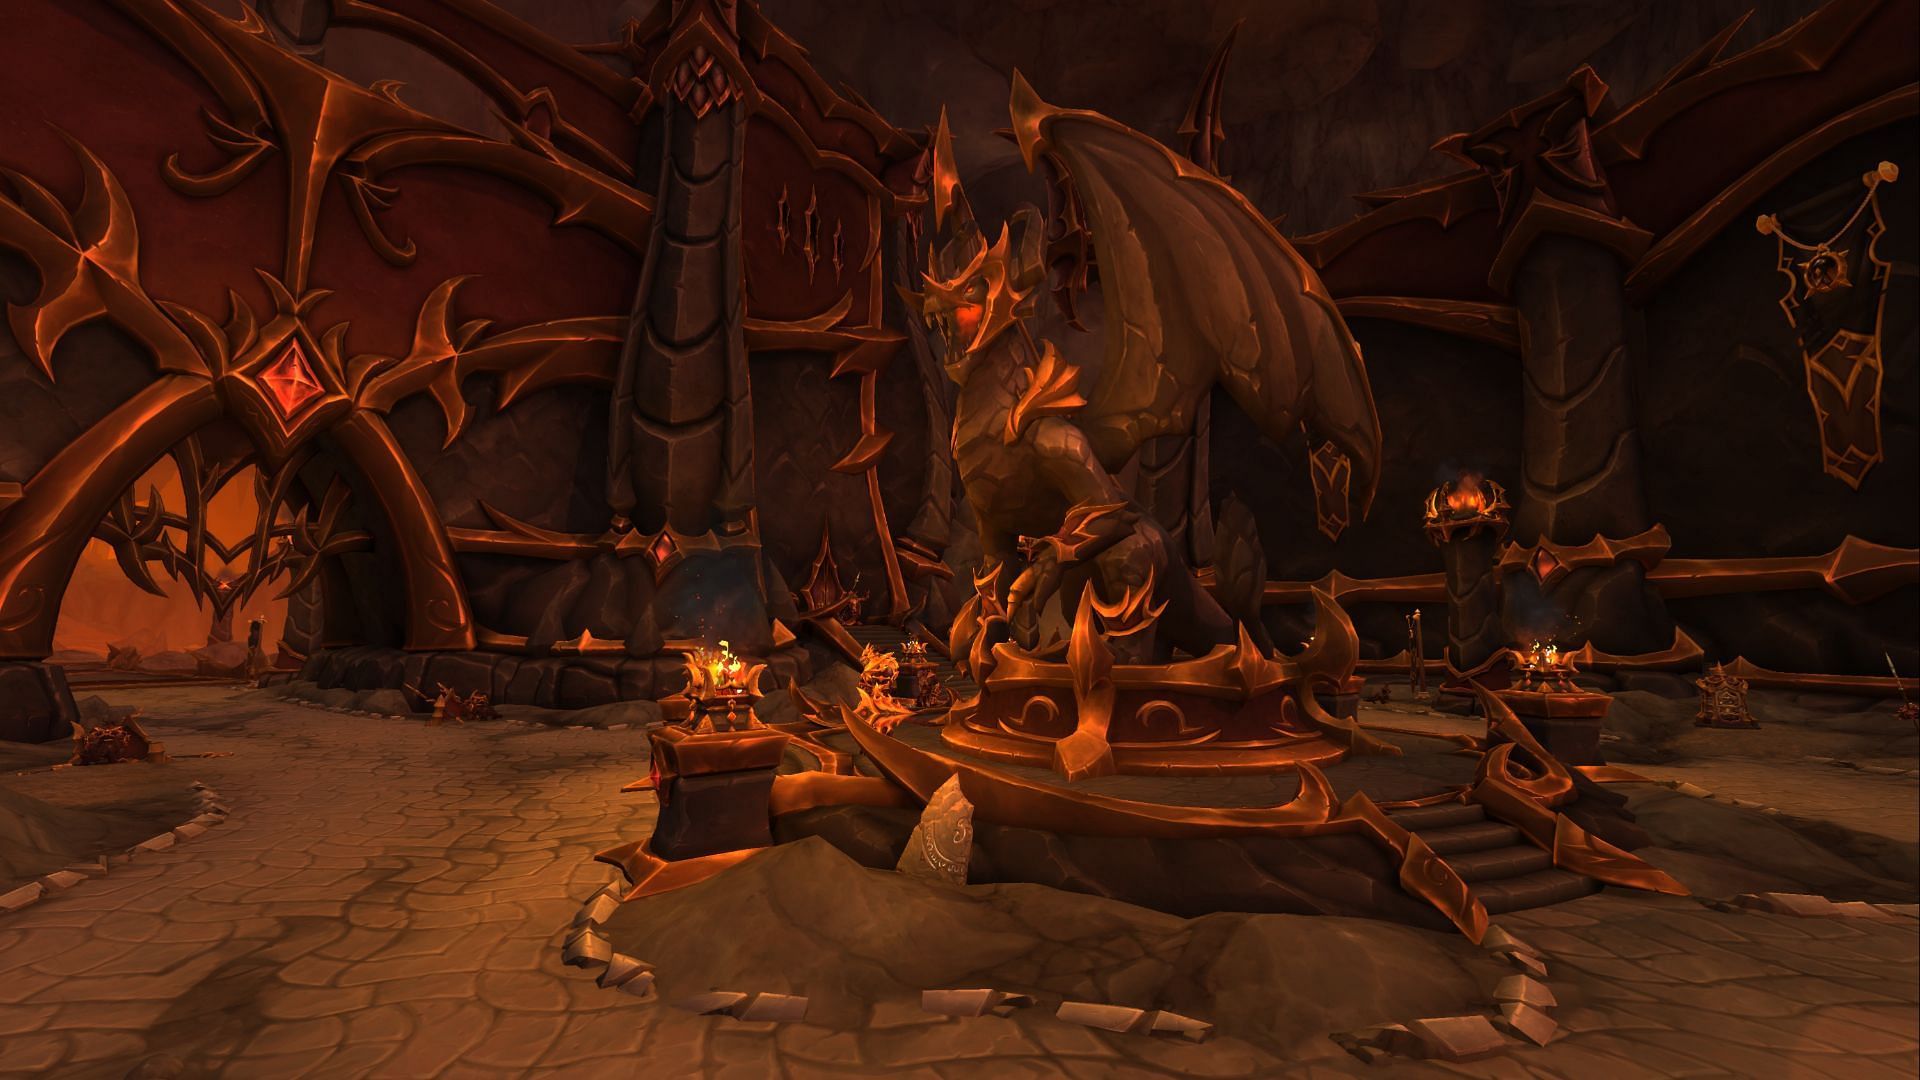 No quests needed - fly right into Zaralek Cavern in World of Warcraft: Dragonflight (Image via Blizzard Entertainment)